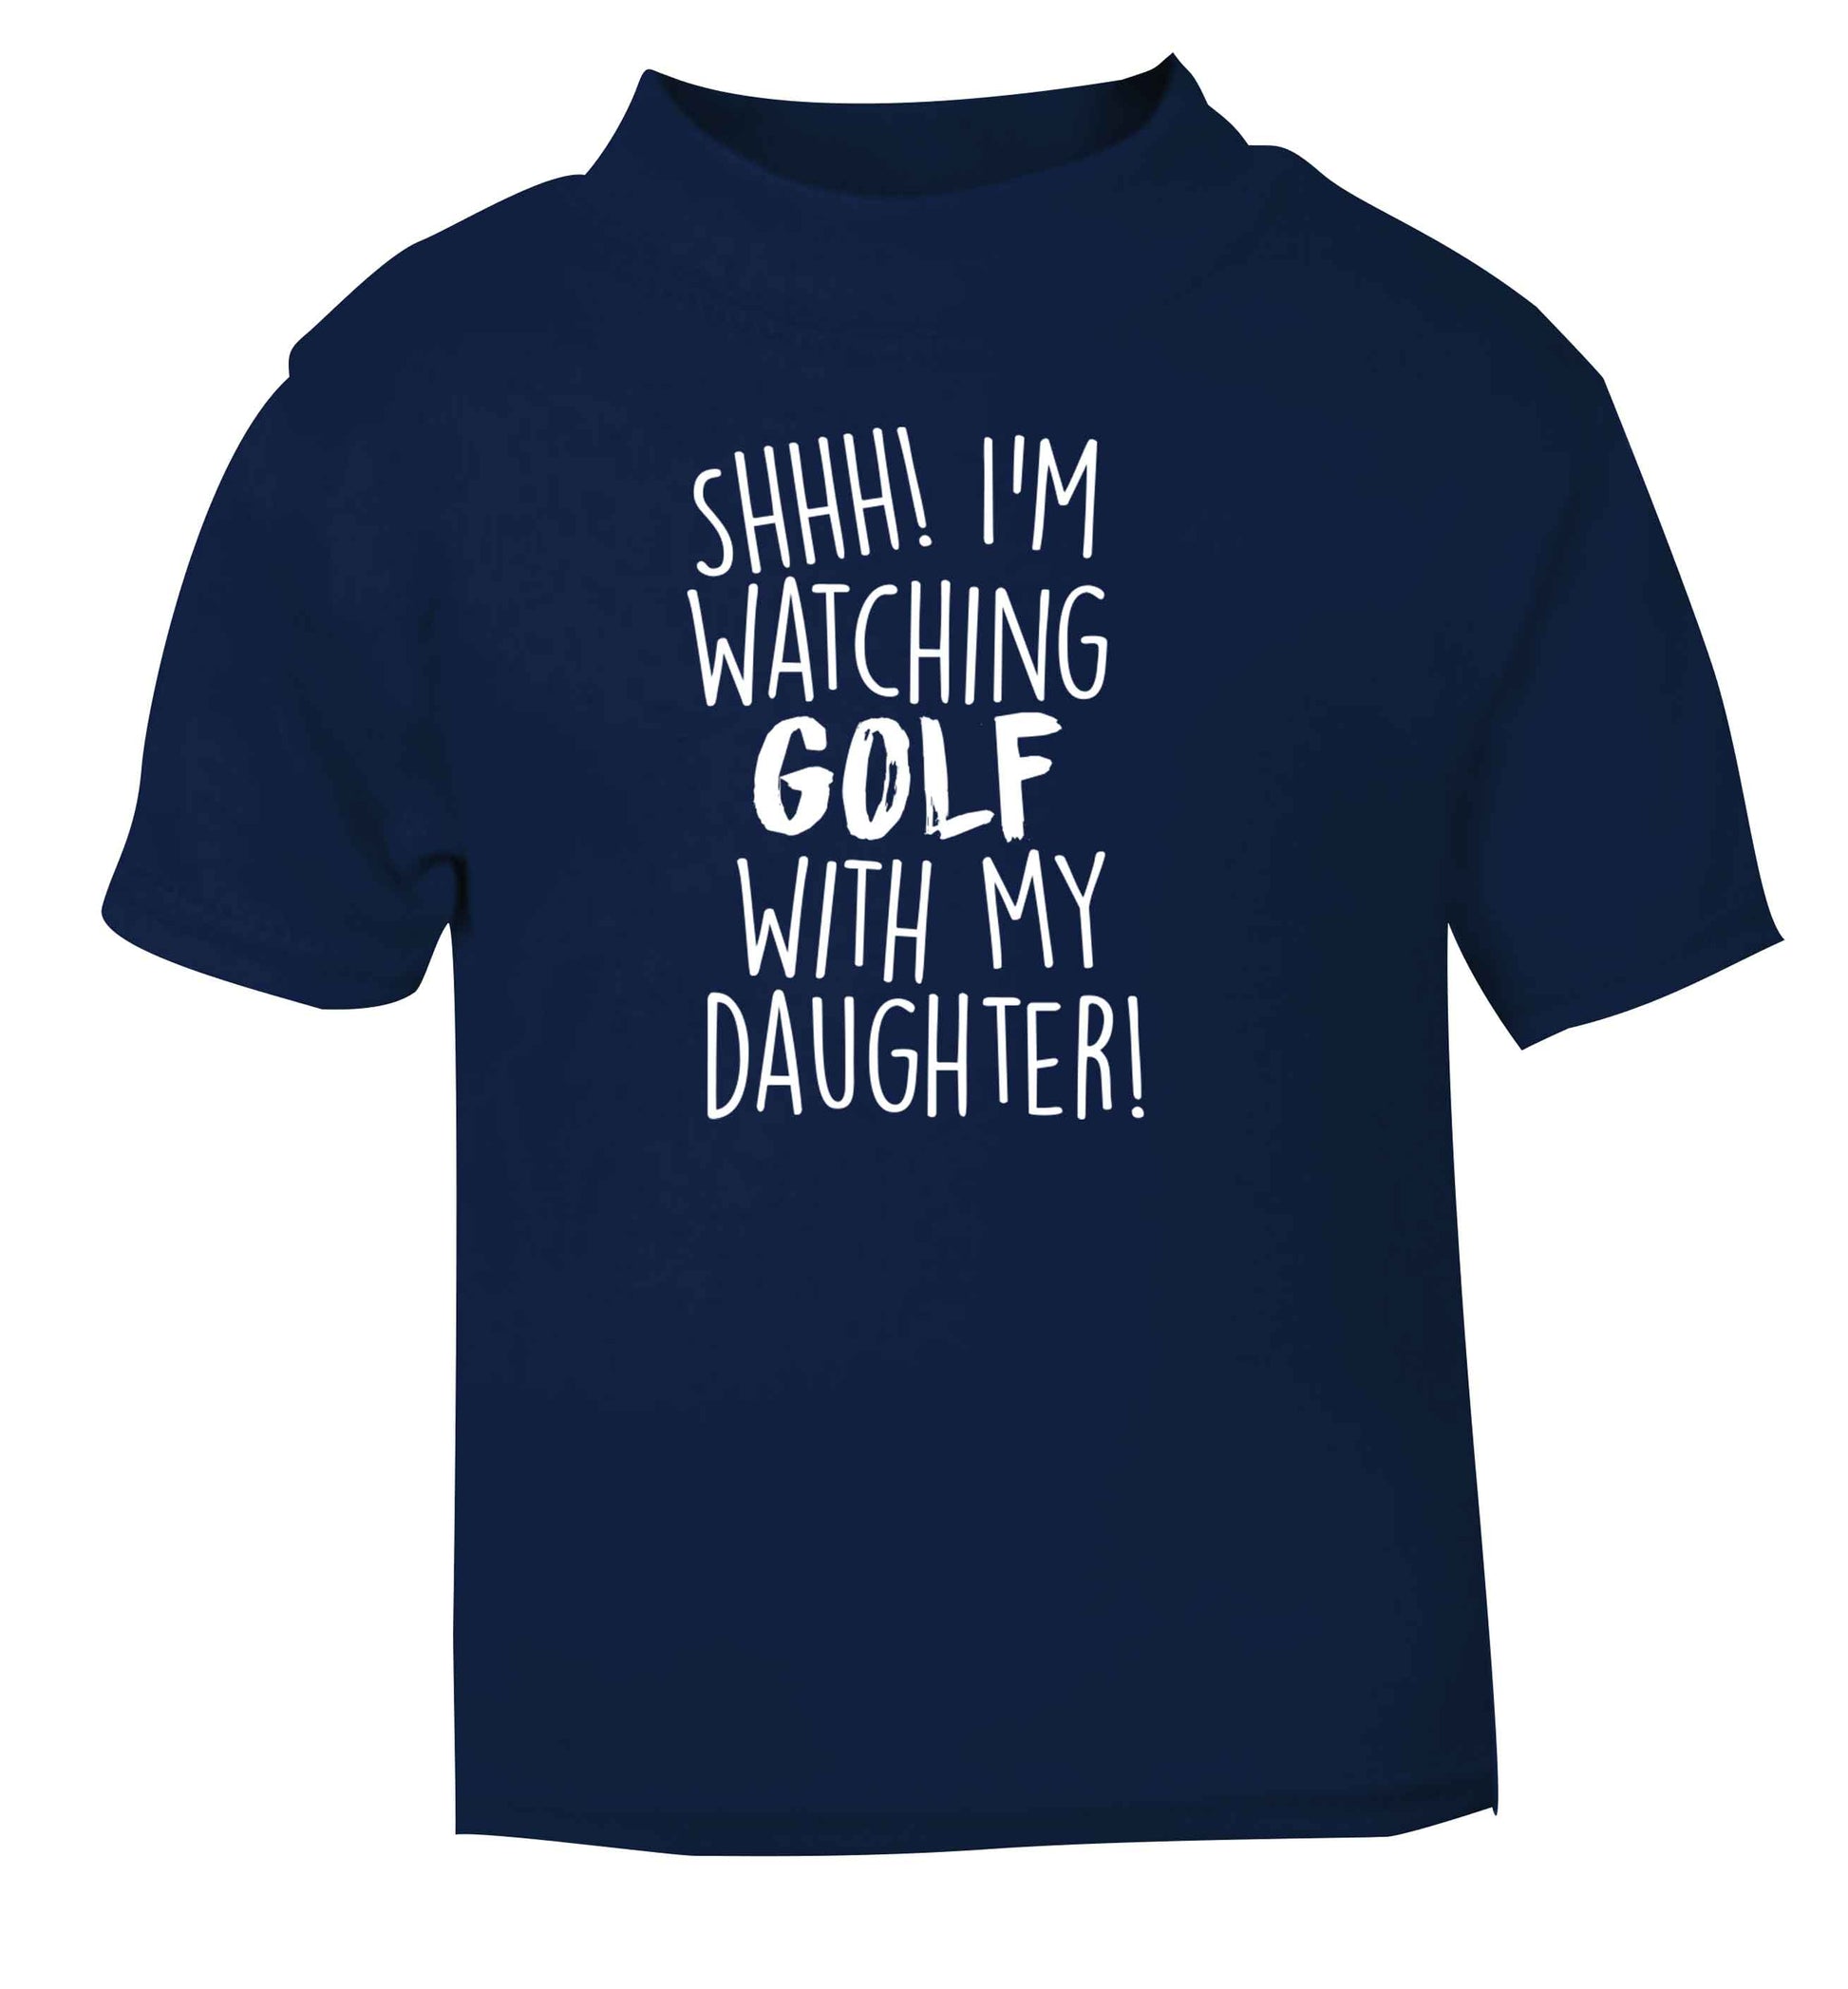 Shh I'm watching golf with my daughter navy Baby Toddler Tshirt 2 Years